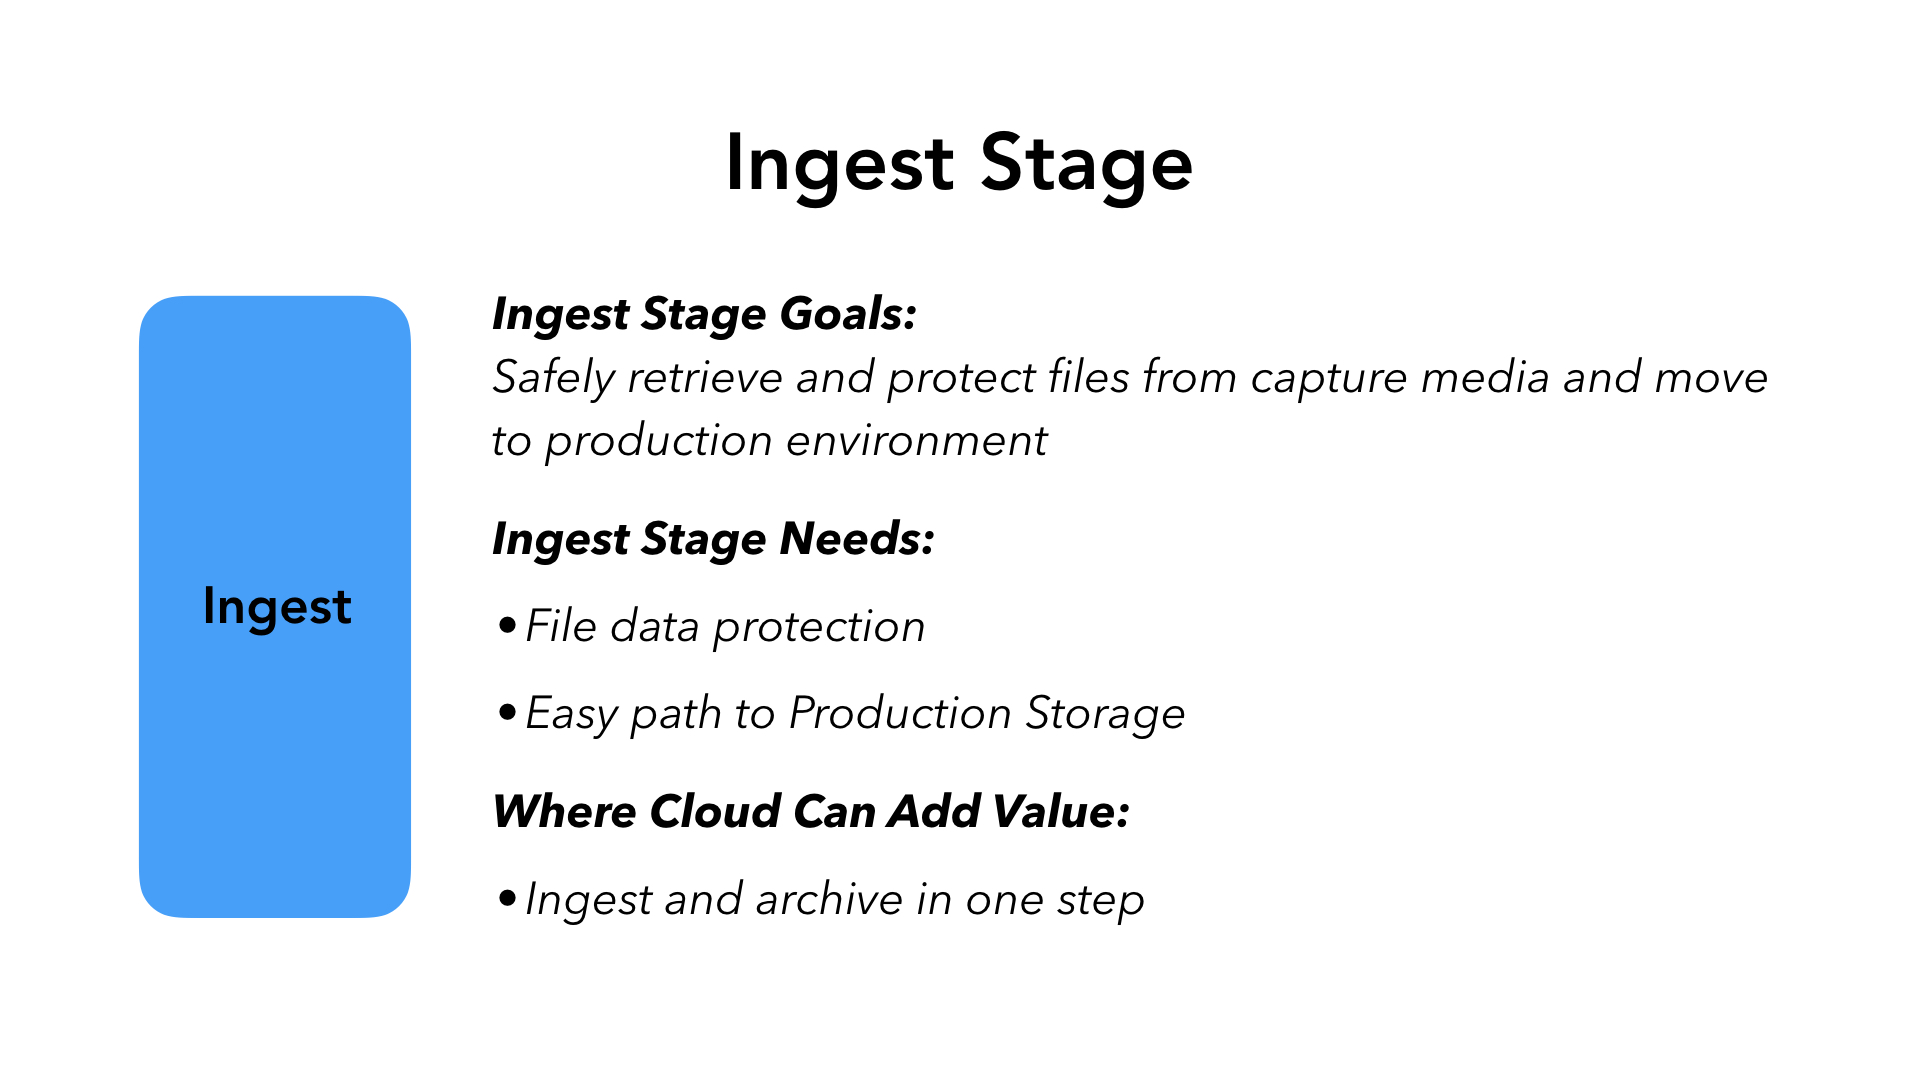 Ingest Stage - Ingest Stage Goals: Safely retrieve and protect files from capture media and move to production environment. Ingest Stage Needs: File data protection - Easy path to Production Storage. Where Cloud Can Add Value: Ingest and archive in one step